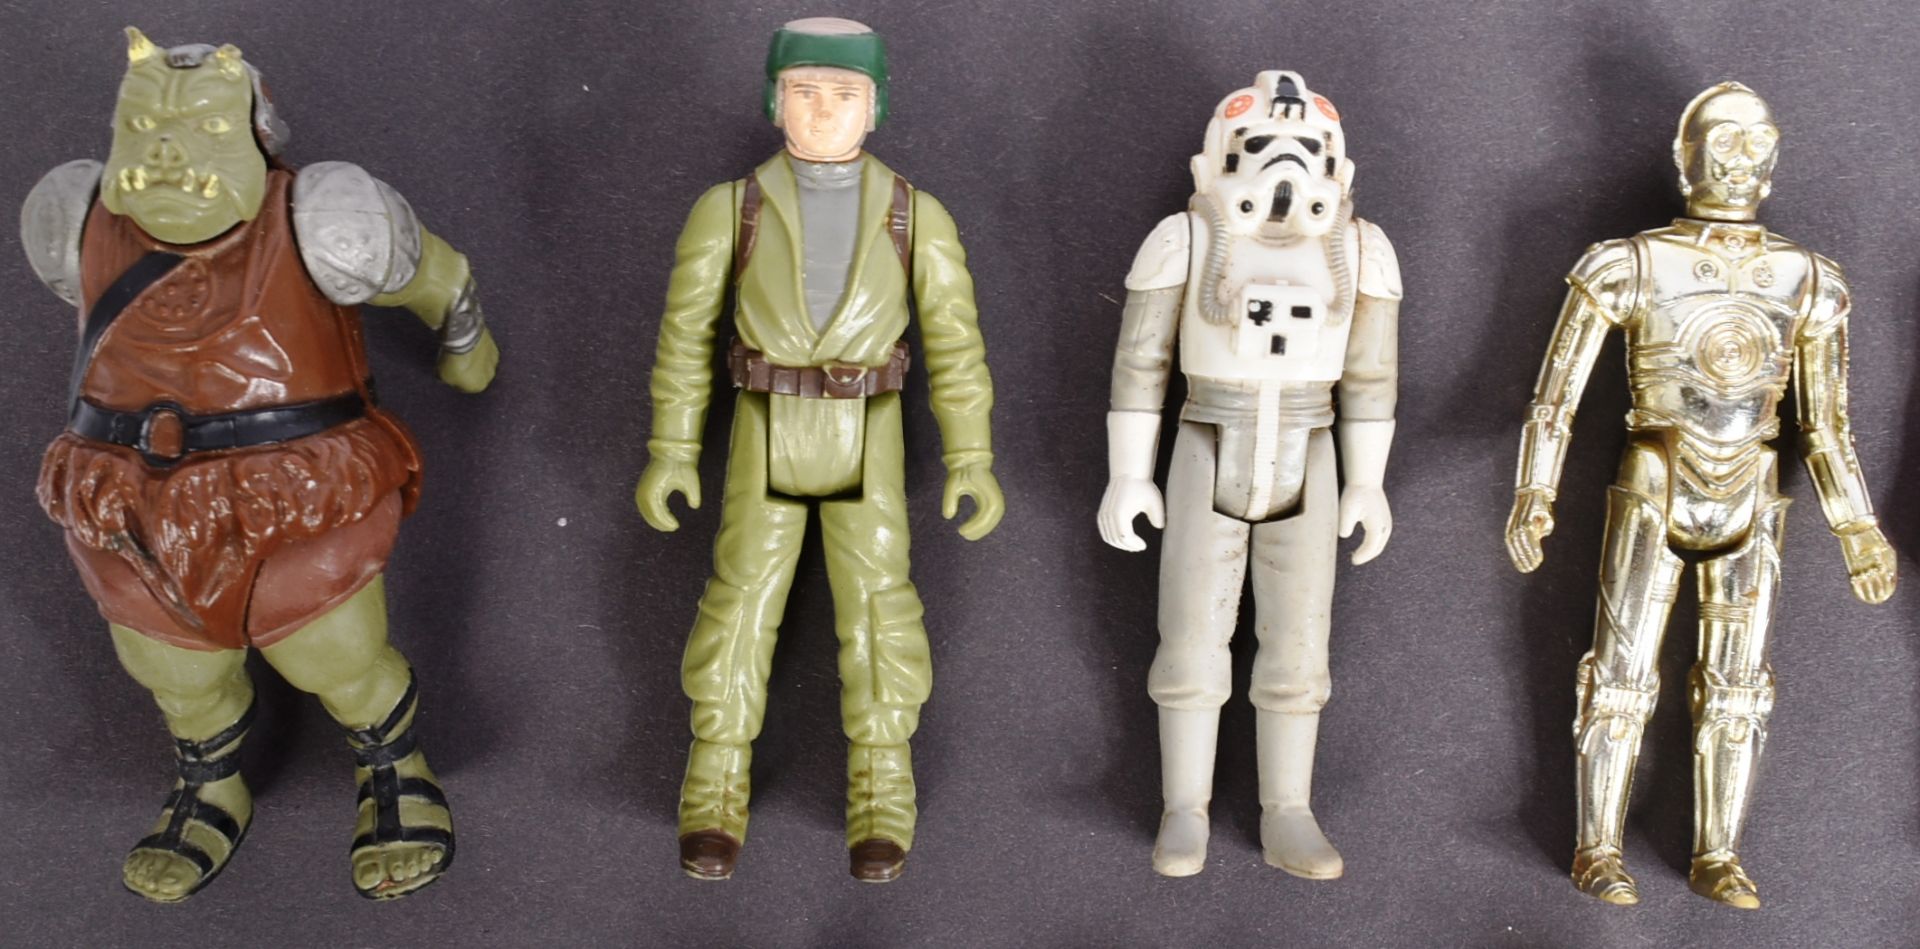 STAR WARS - COLLECTION OF PALITOY / KENNER ACTION FIGURES - Image 2 of 5